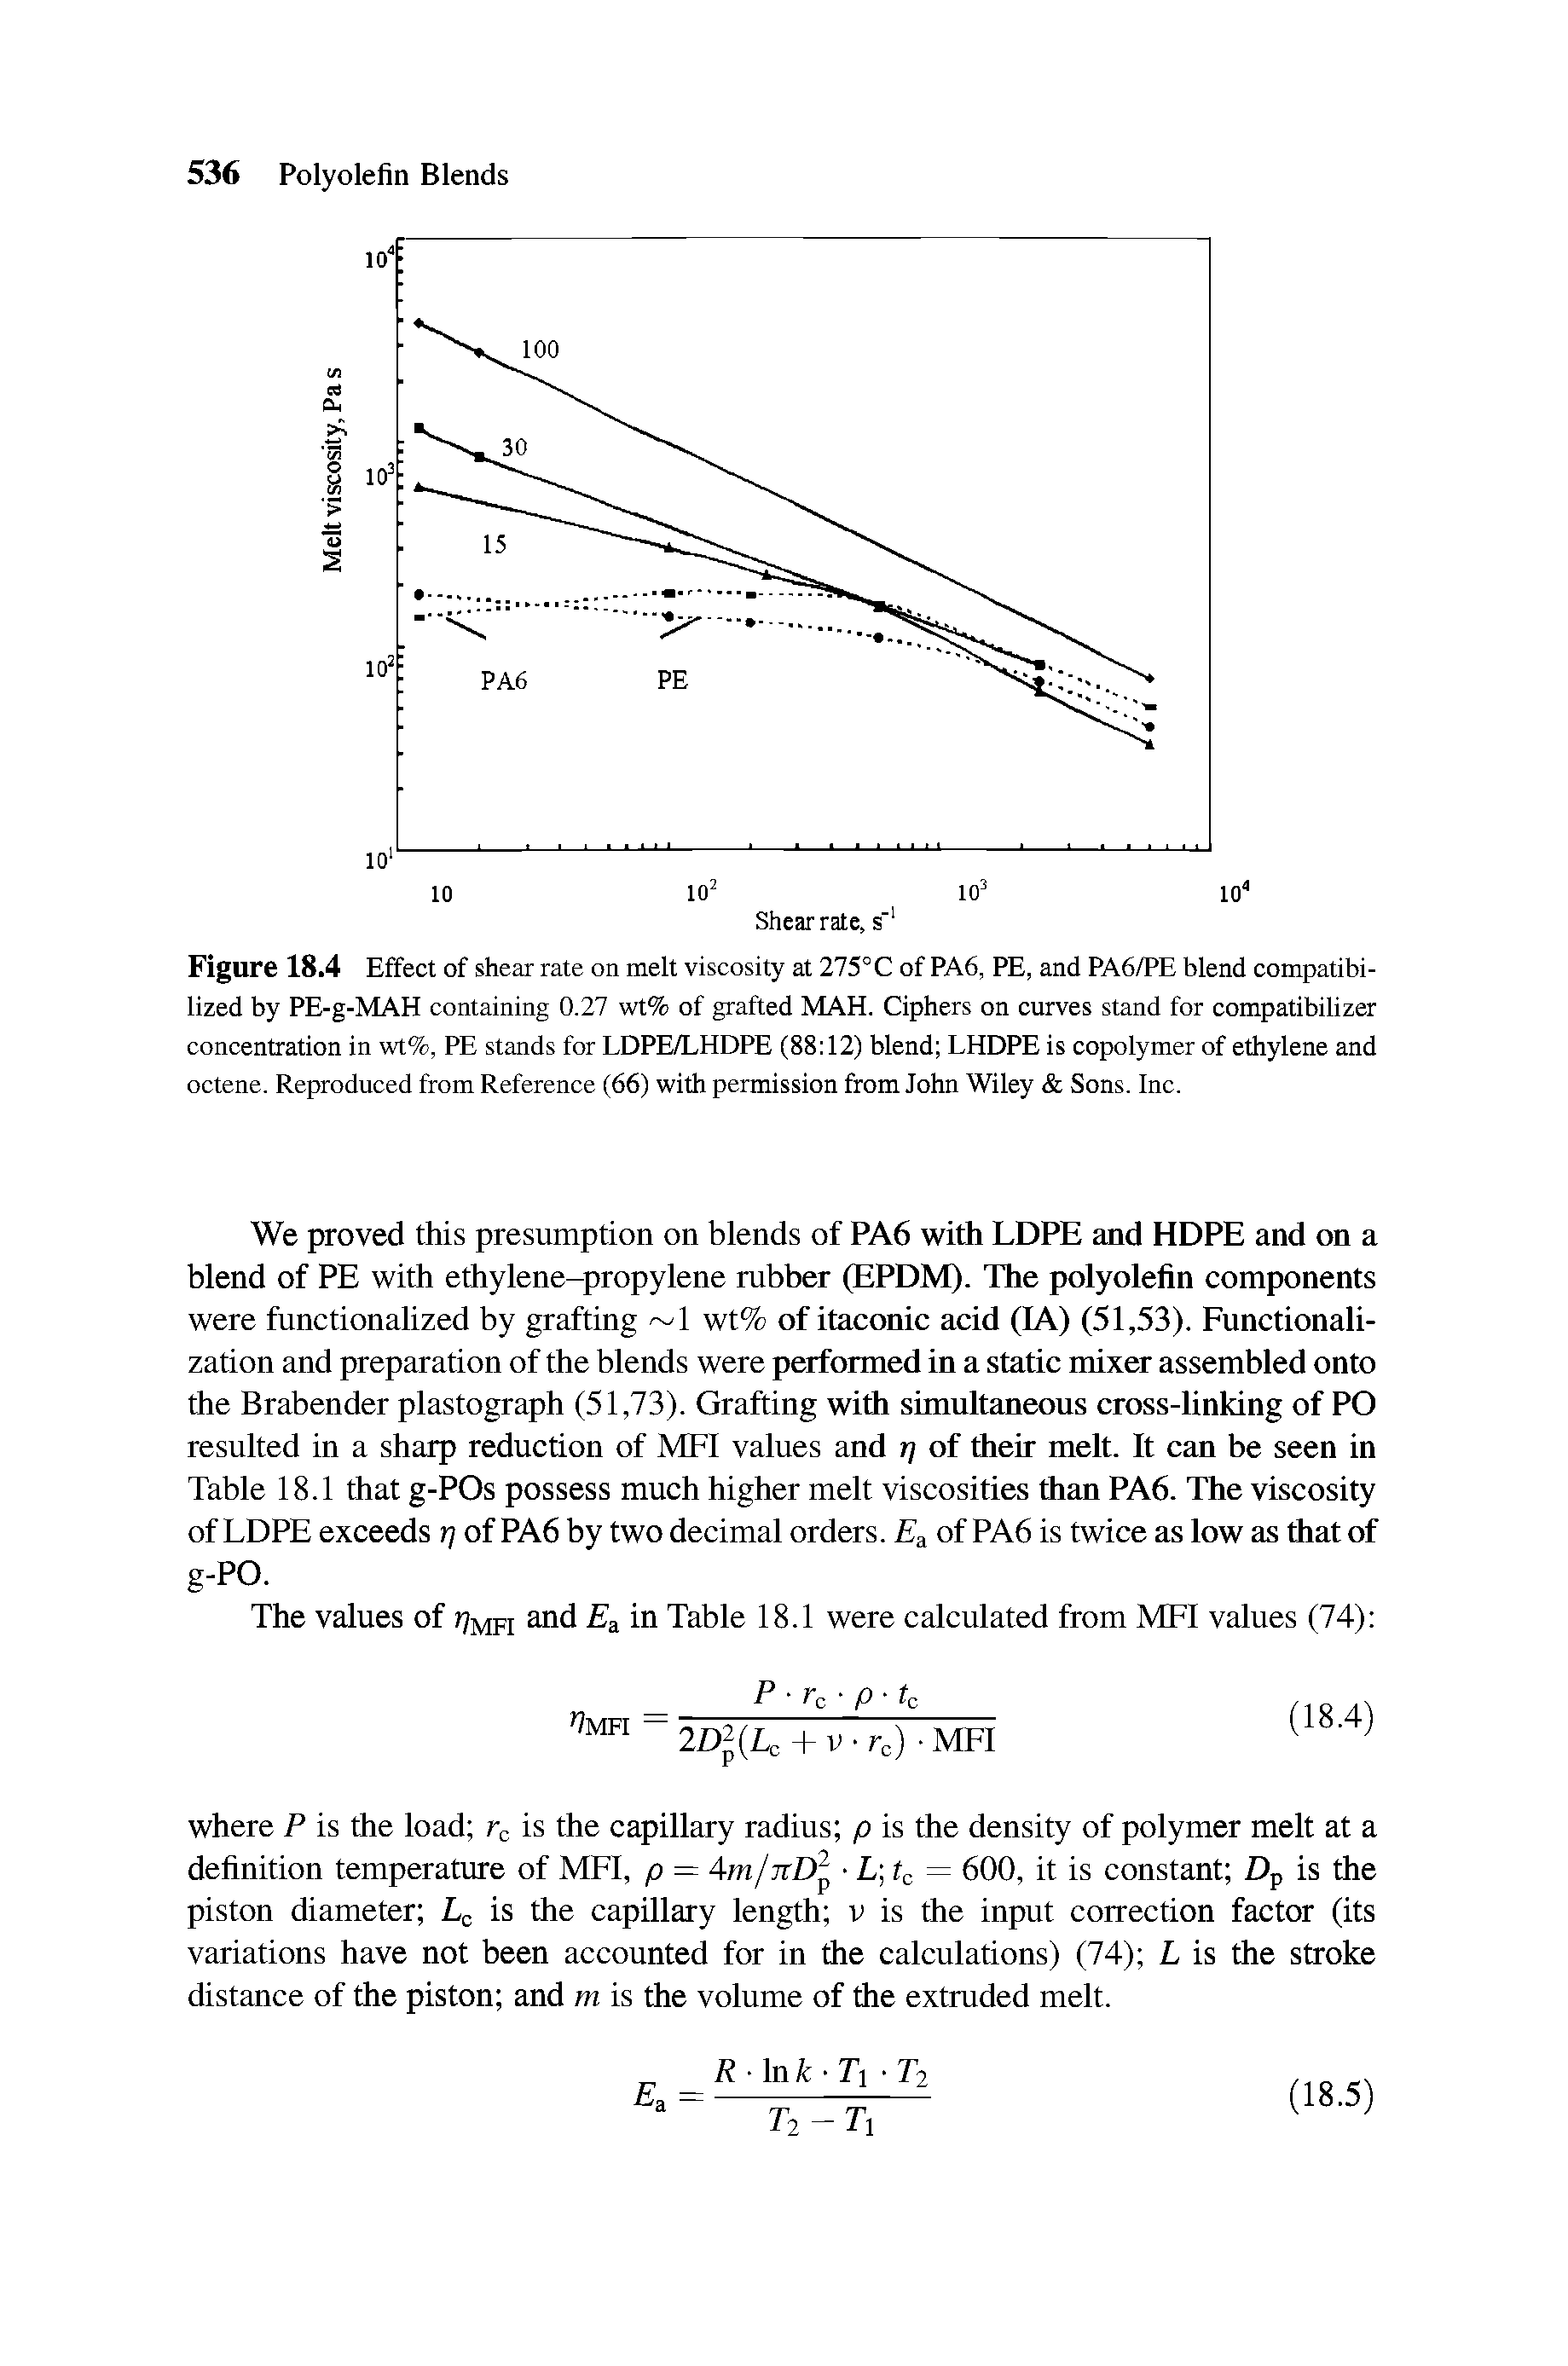 Figure 18.4 Effect of shear rate on melt viscosity at 275° C of PA6, PE, and PA6/PE blend compatibi-lized by PE-g-MAH containing 0.27 wt% of grafted MAH. Ciphers on curves stand for compatibilizer concentration in wt%, PE stands for LDPE/LHDPE (88 12) blend LHDPE is copolymer of ethylene and octene. Reproduced from Reference (66) with permission from John Wiley Sons. Inc.